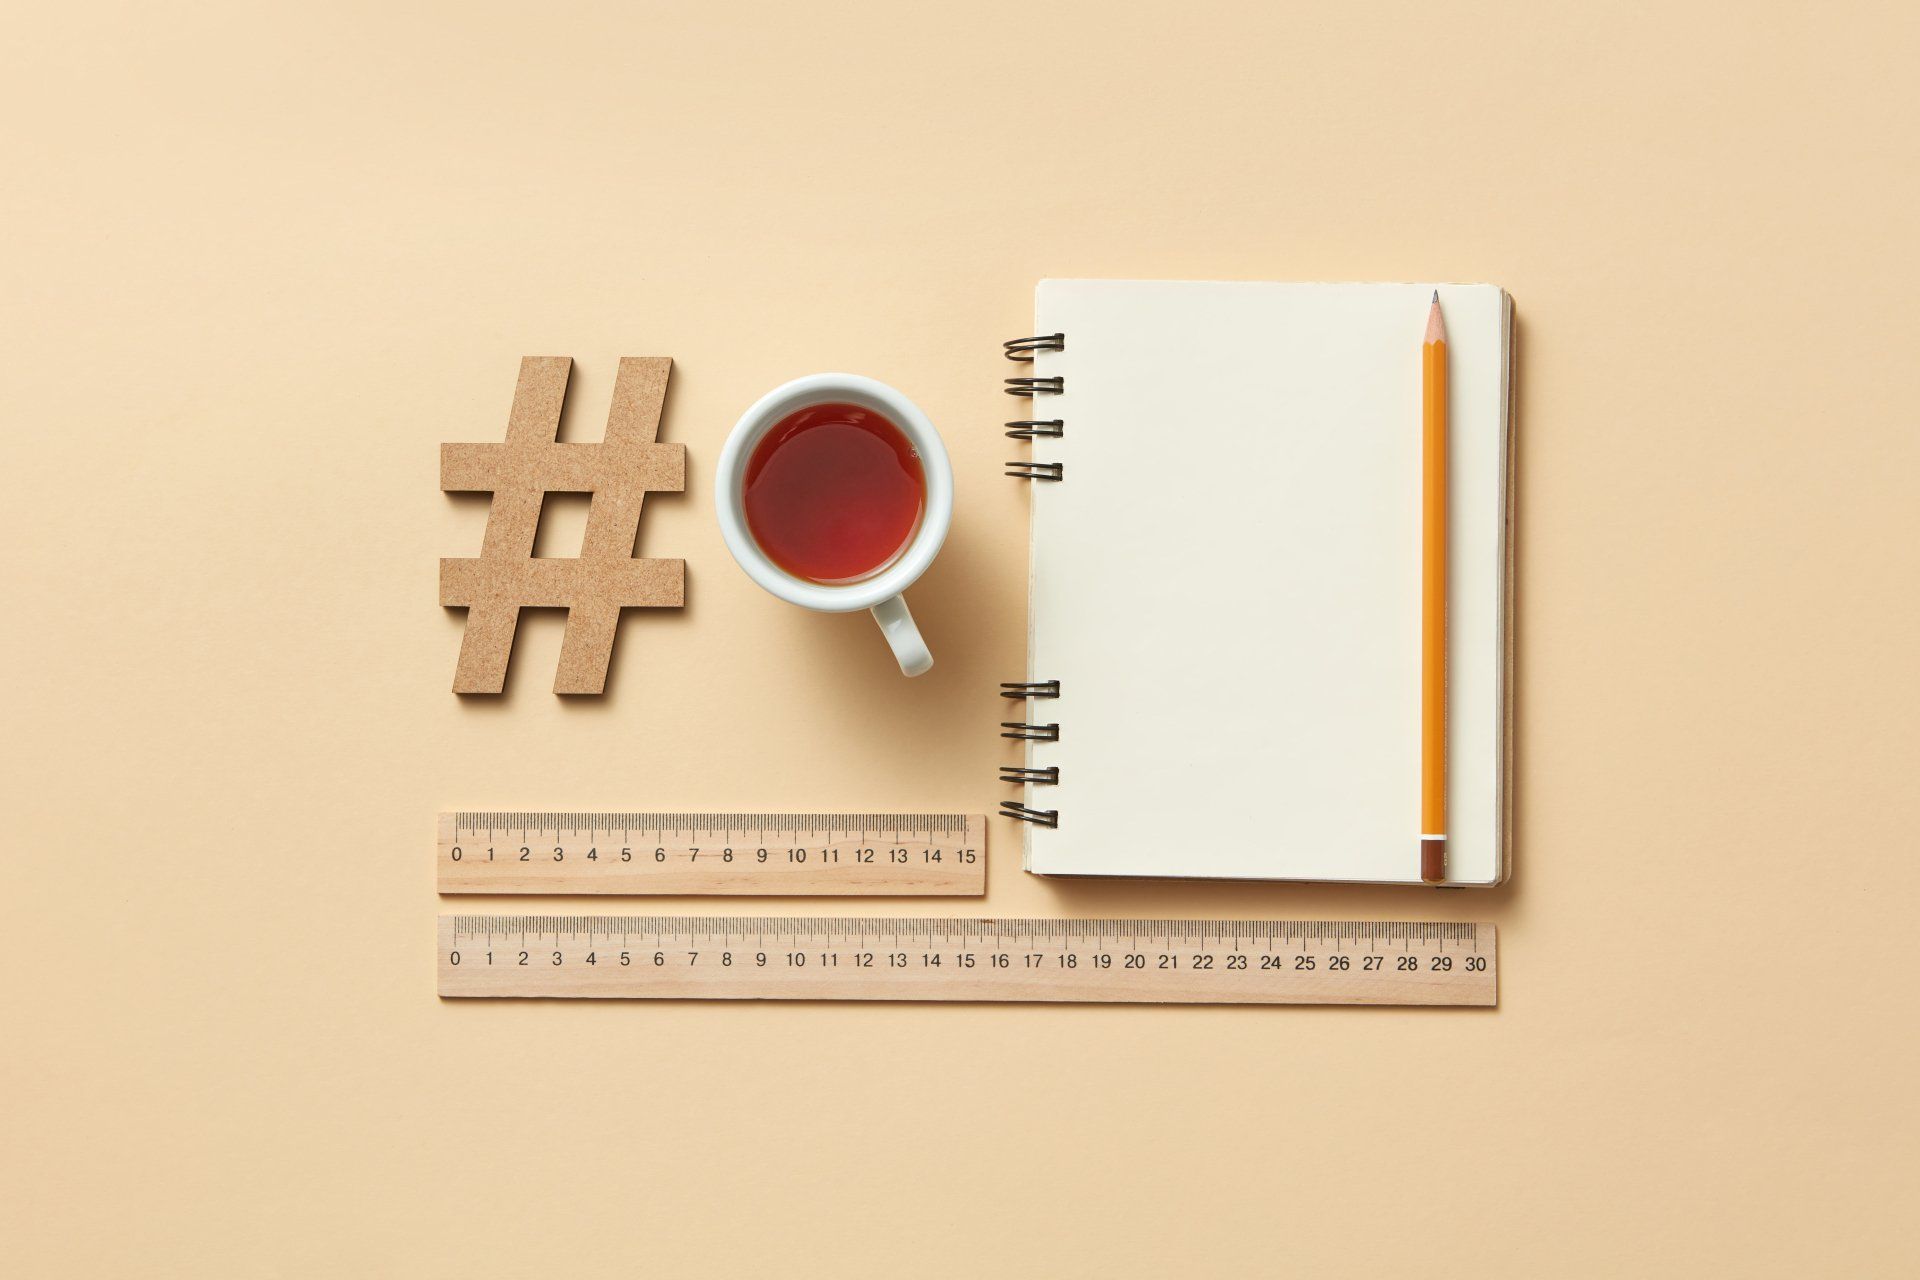 Hashtags – what are they? And how are you supposed to use hashtags for social media?